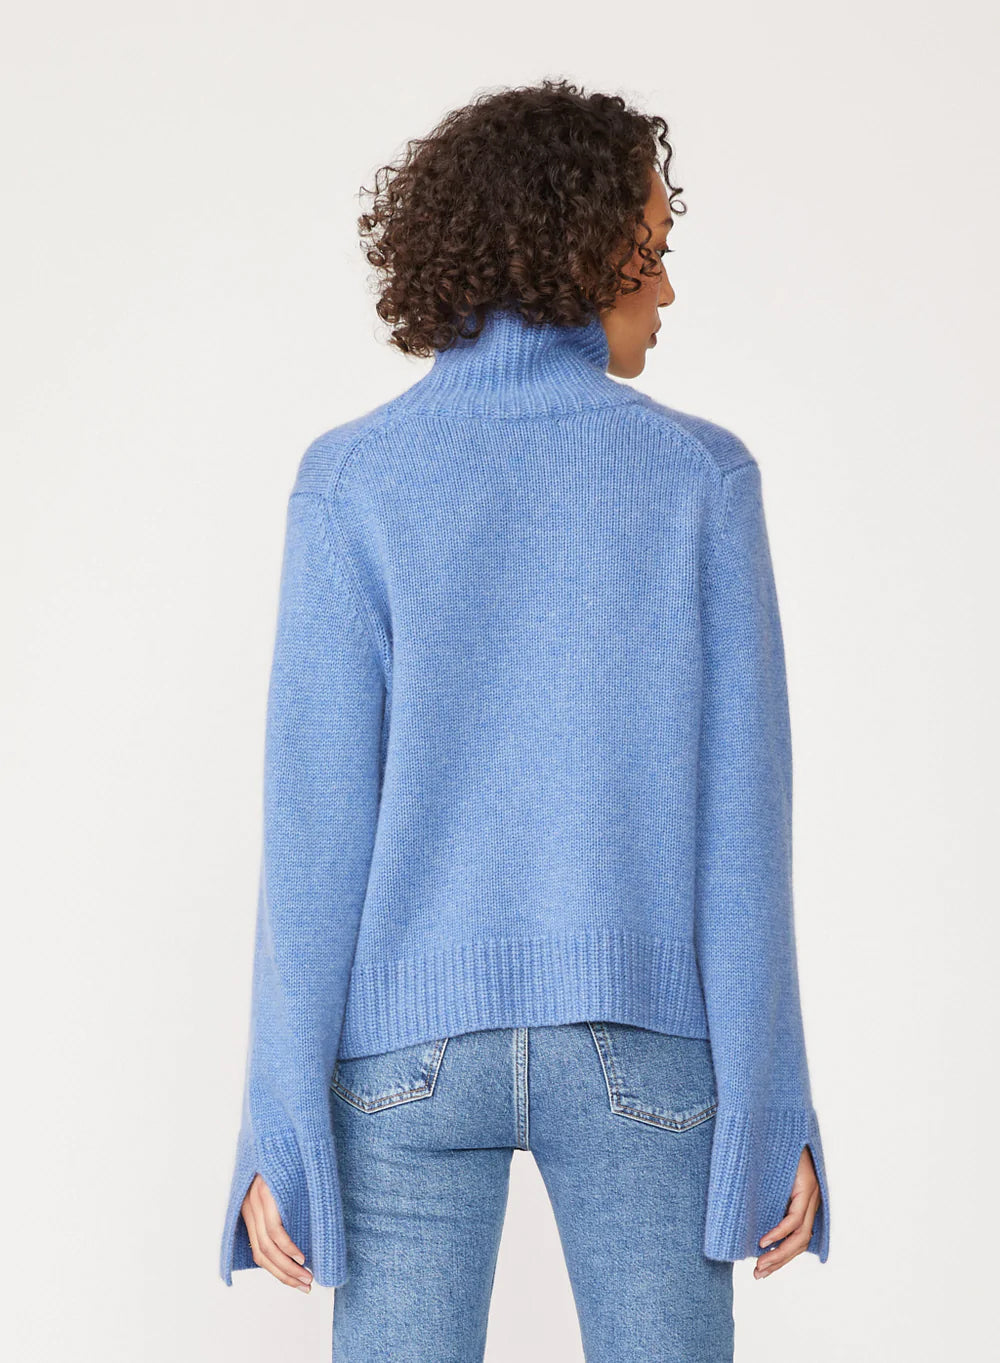 Cozy Cashmere Turtleneck Sweater - Shirts & Tops